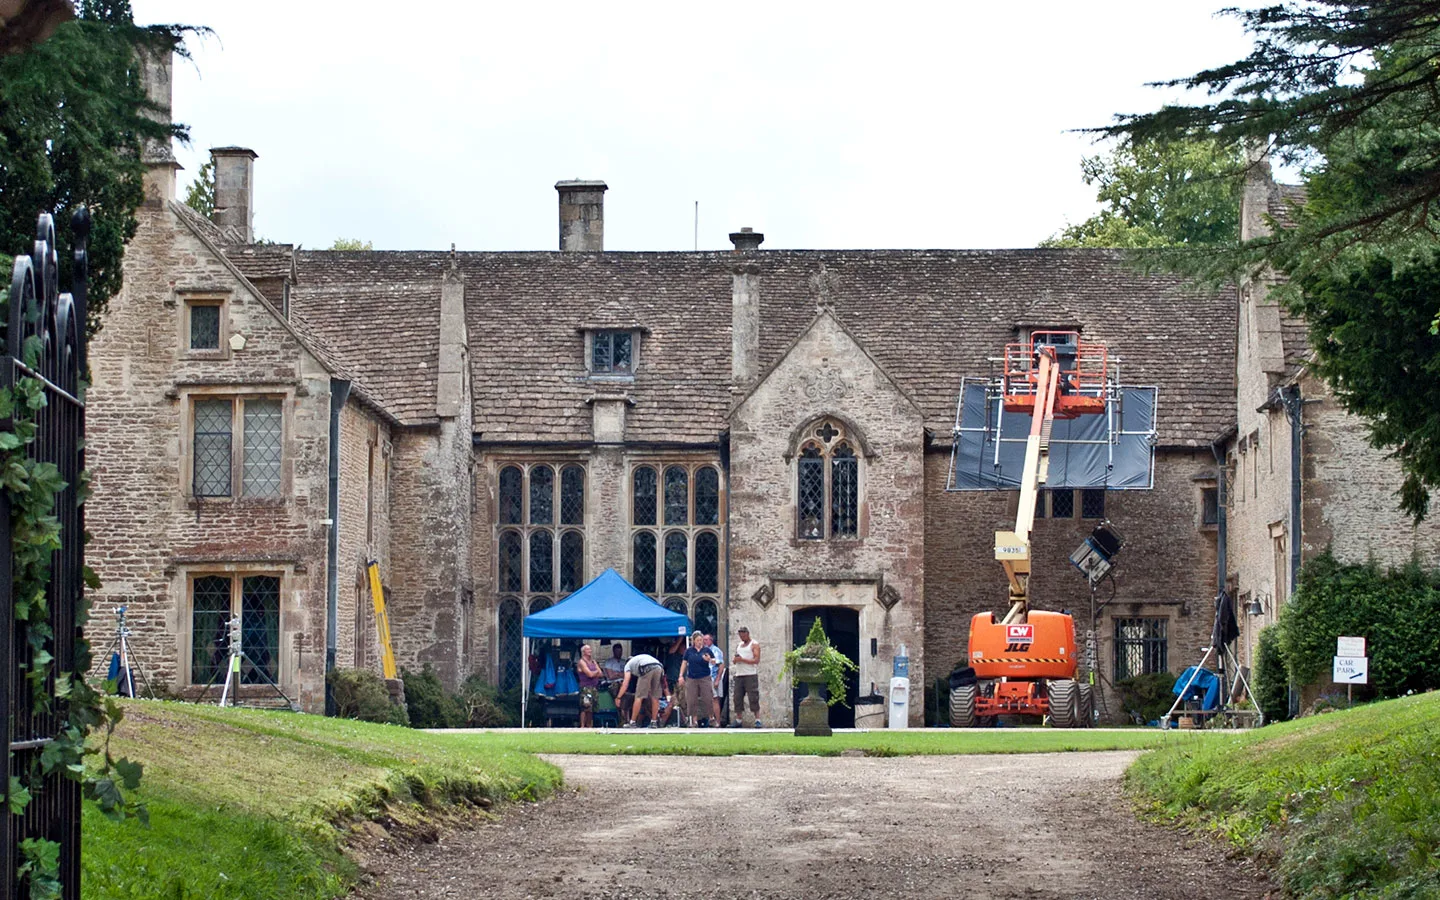 Filming taking place at Chavenage House in the Cotswolds